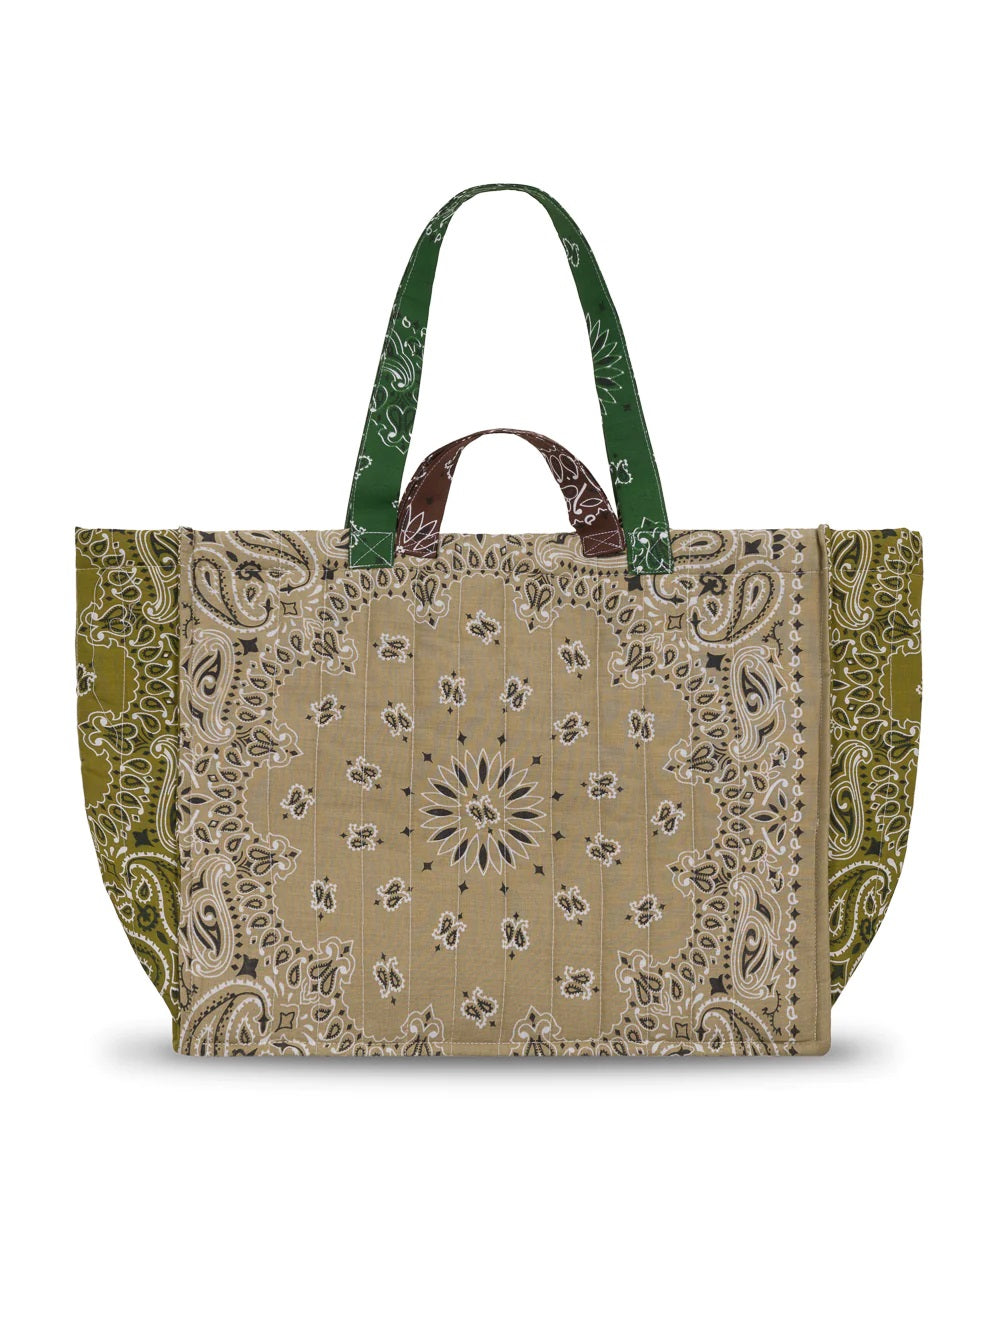 Call It By Your Name Quilted Maxi Cabas Tote - Love - Beige / Quadricolor